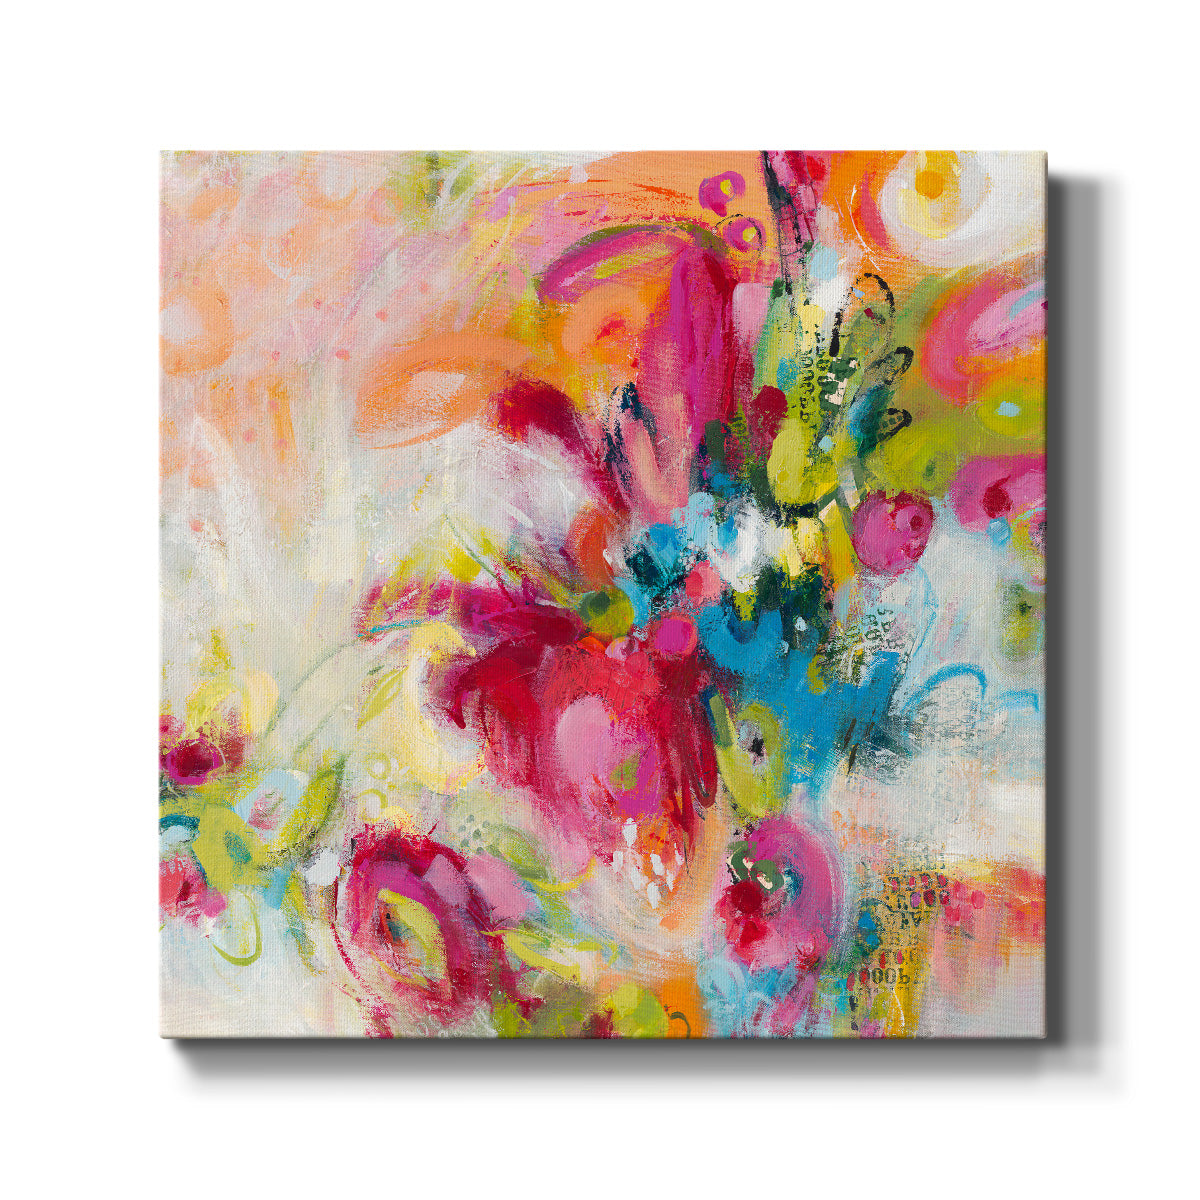 Let's Bounce-Premium Gallery Wrapped Canvas - Ready to Hang